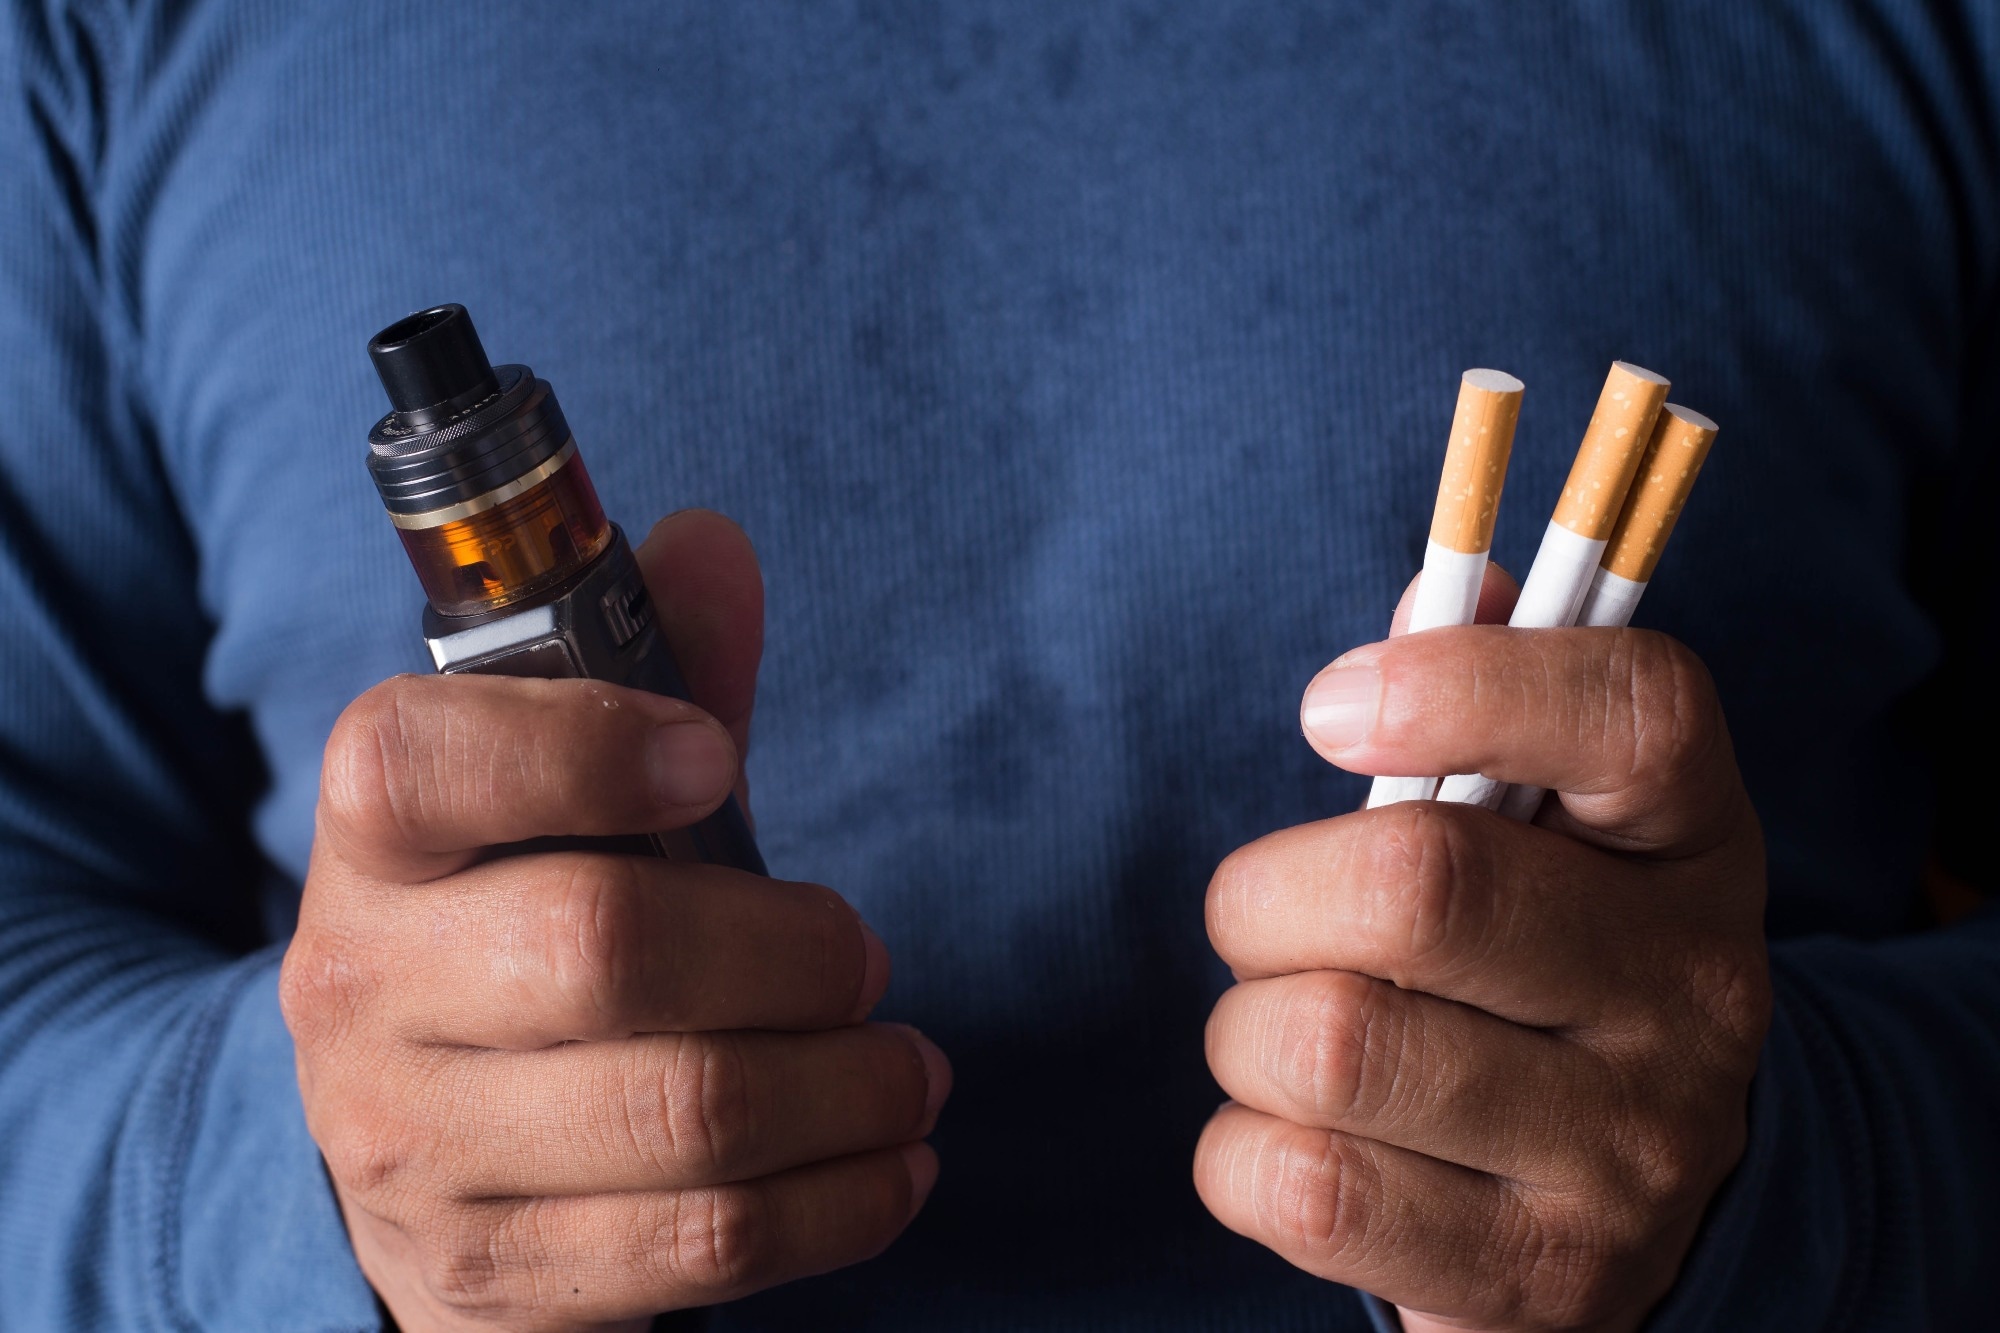 Study: Assessment of Electronic Nicotine Delivery Systems With Cigarette Use and Self-reported Wheezing in the US Adult Population. Image Credit: Parkin Srihawong / Shutterstock.com